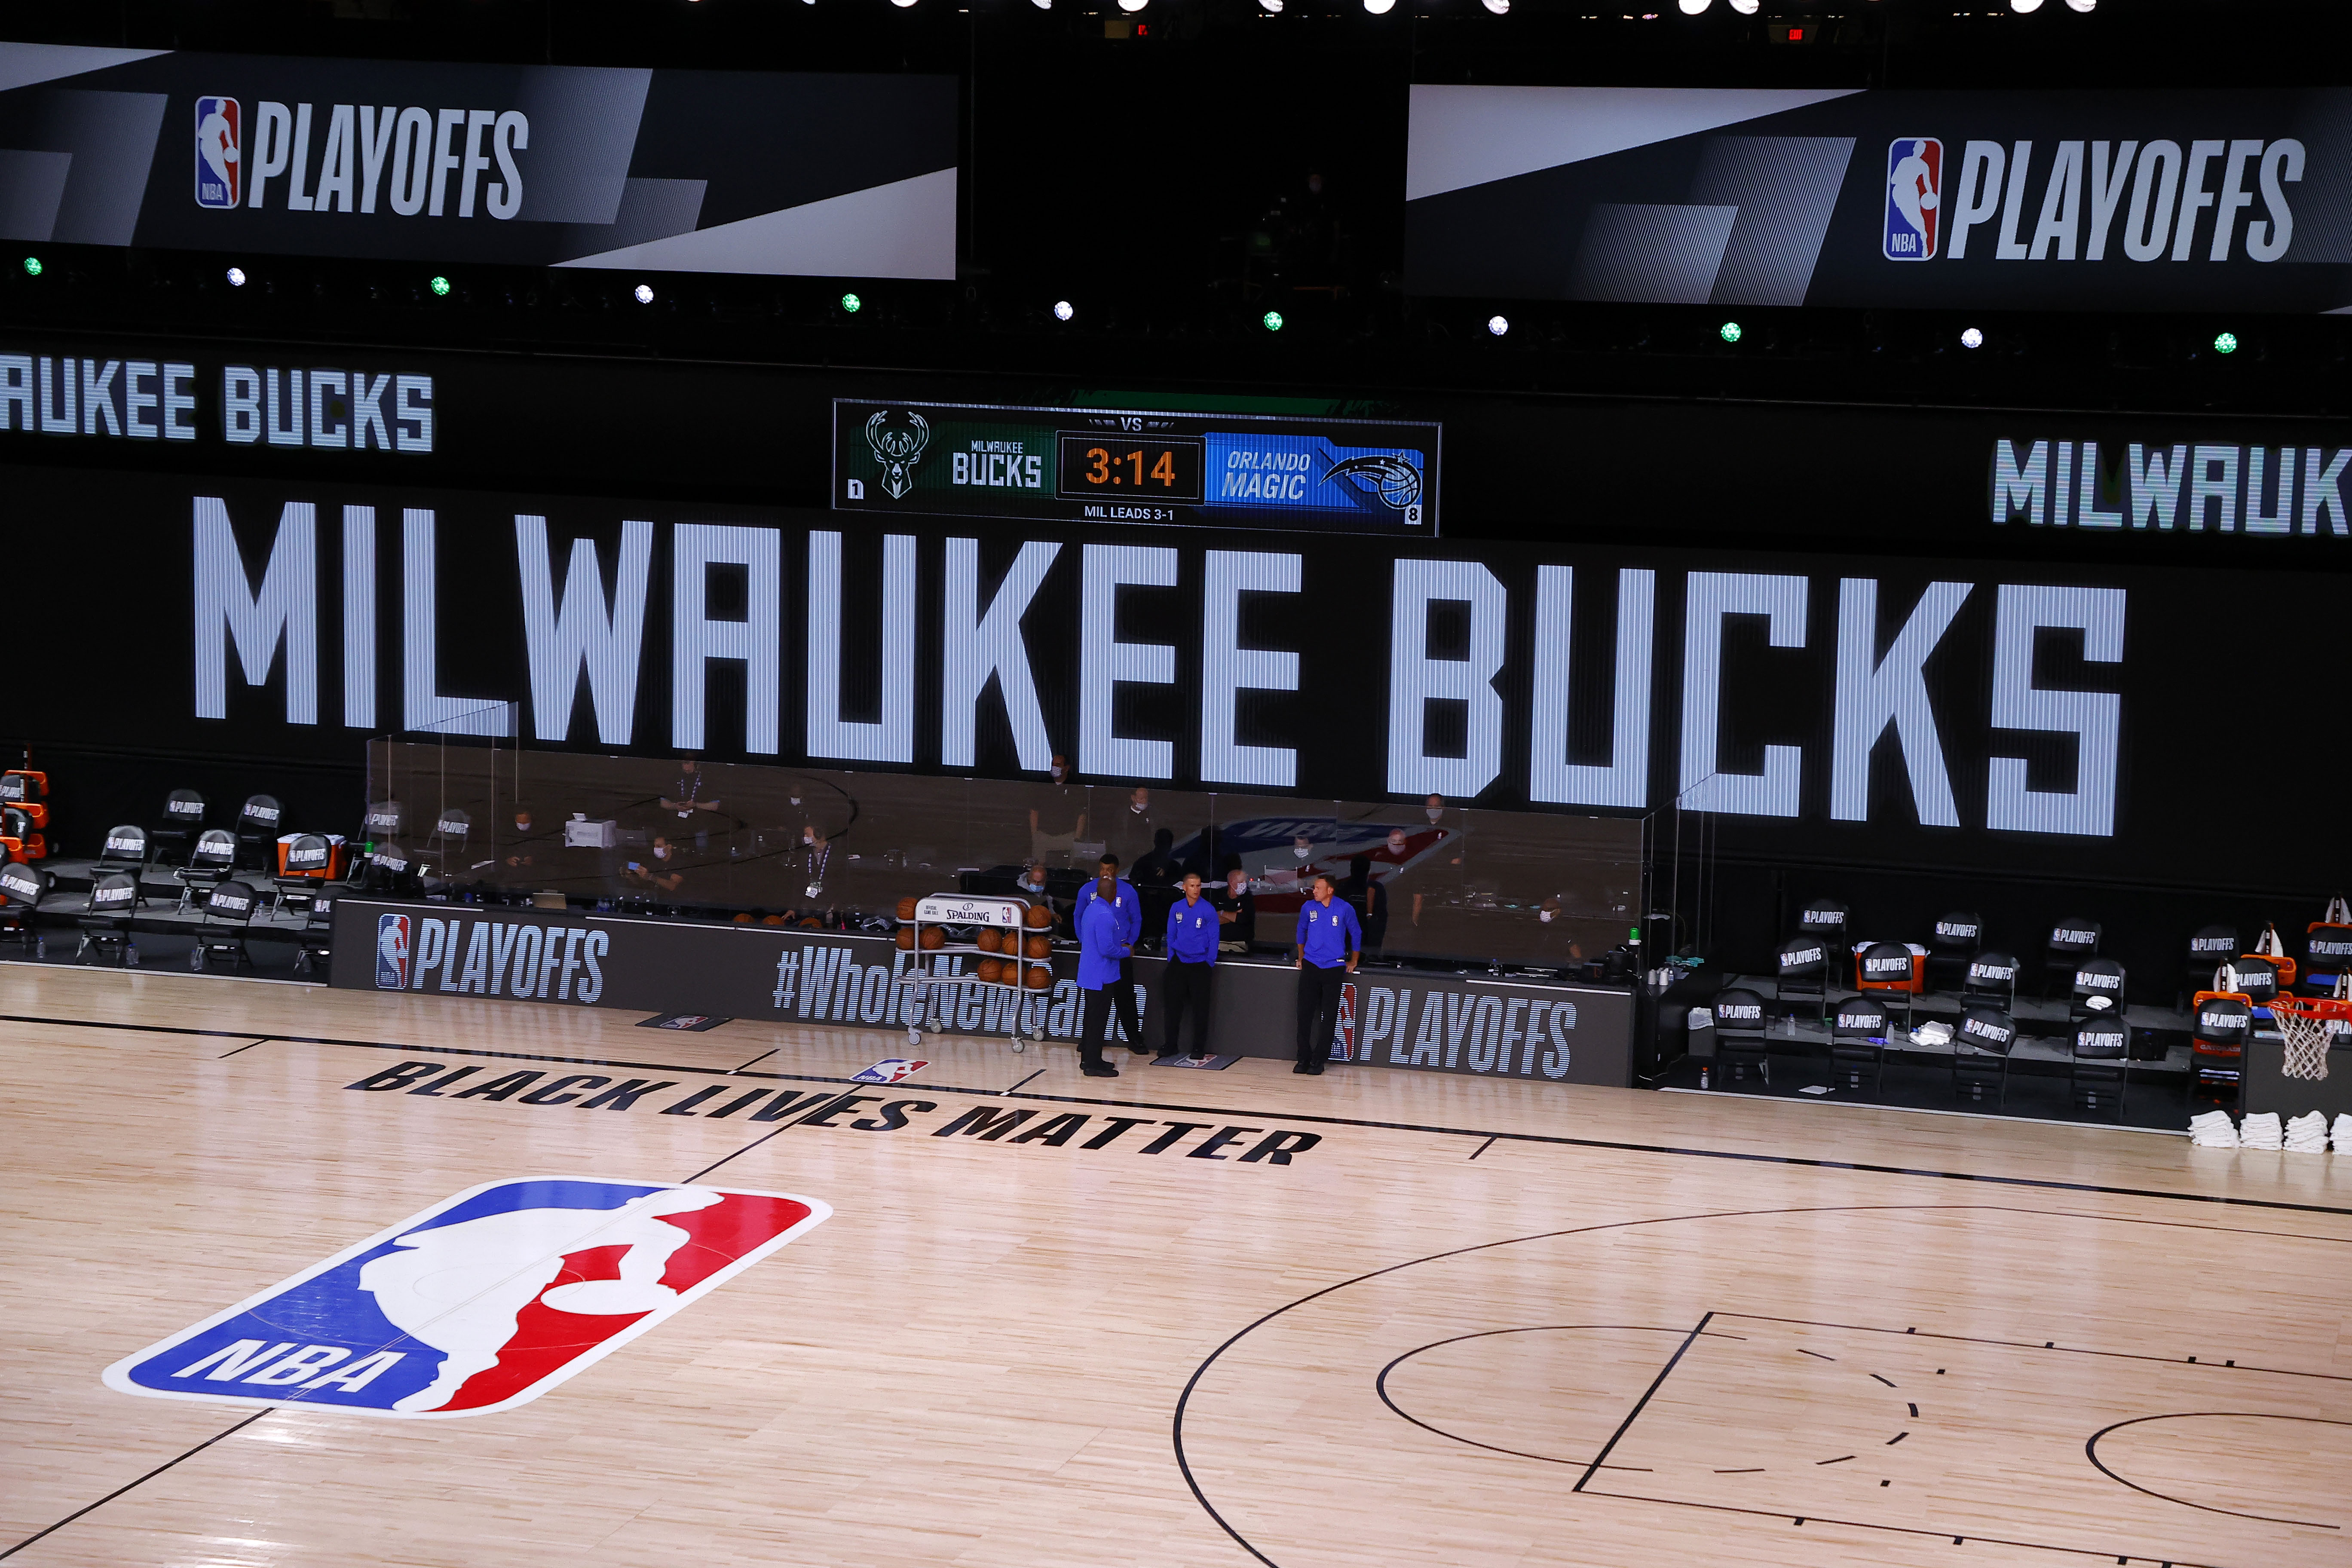 Referees stand on an empty court before the start of what would have been a game between the Milwaukee Bucks and the Orlando Magic in Lake Buena Vista, Florida, on August 26. The Milwaukee Bucks boycotted the playoff game following the police shooting of Jacob Blake.